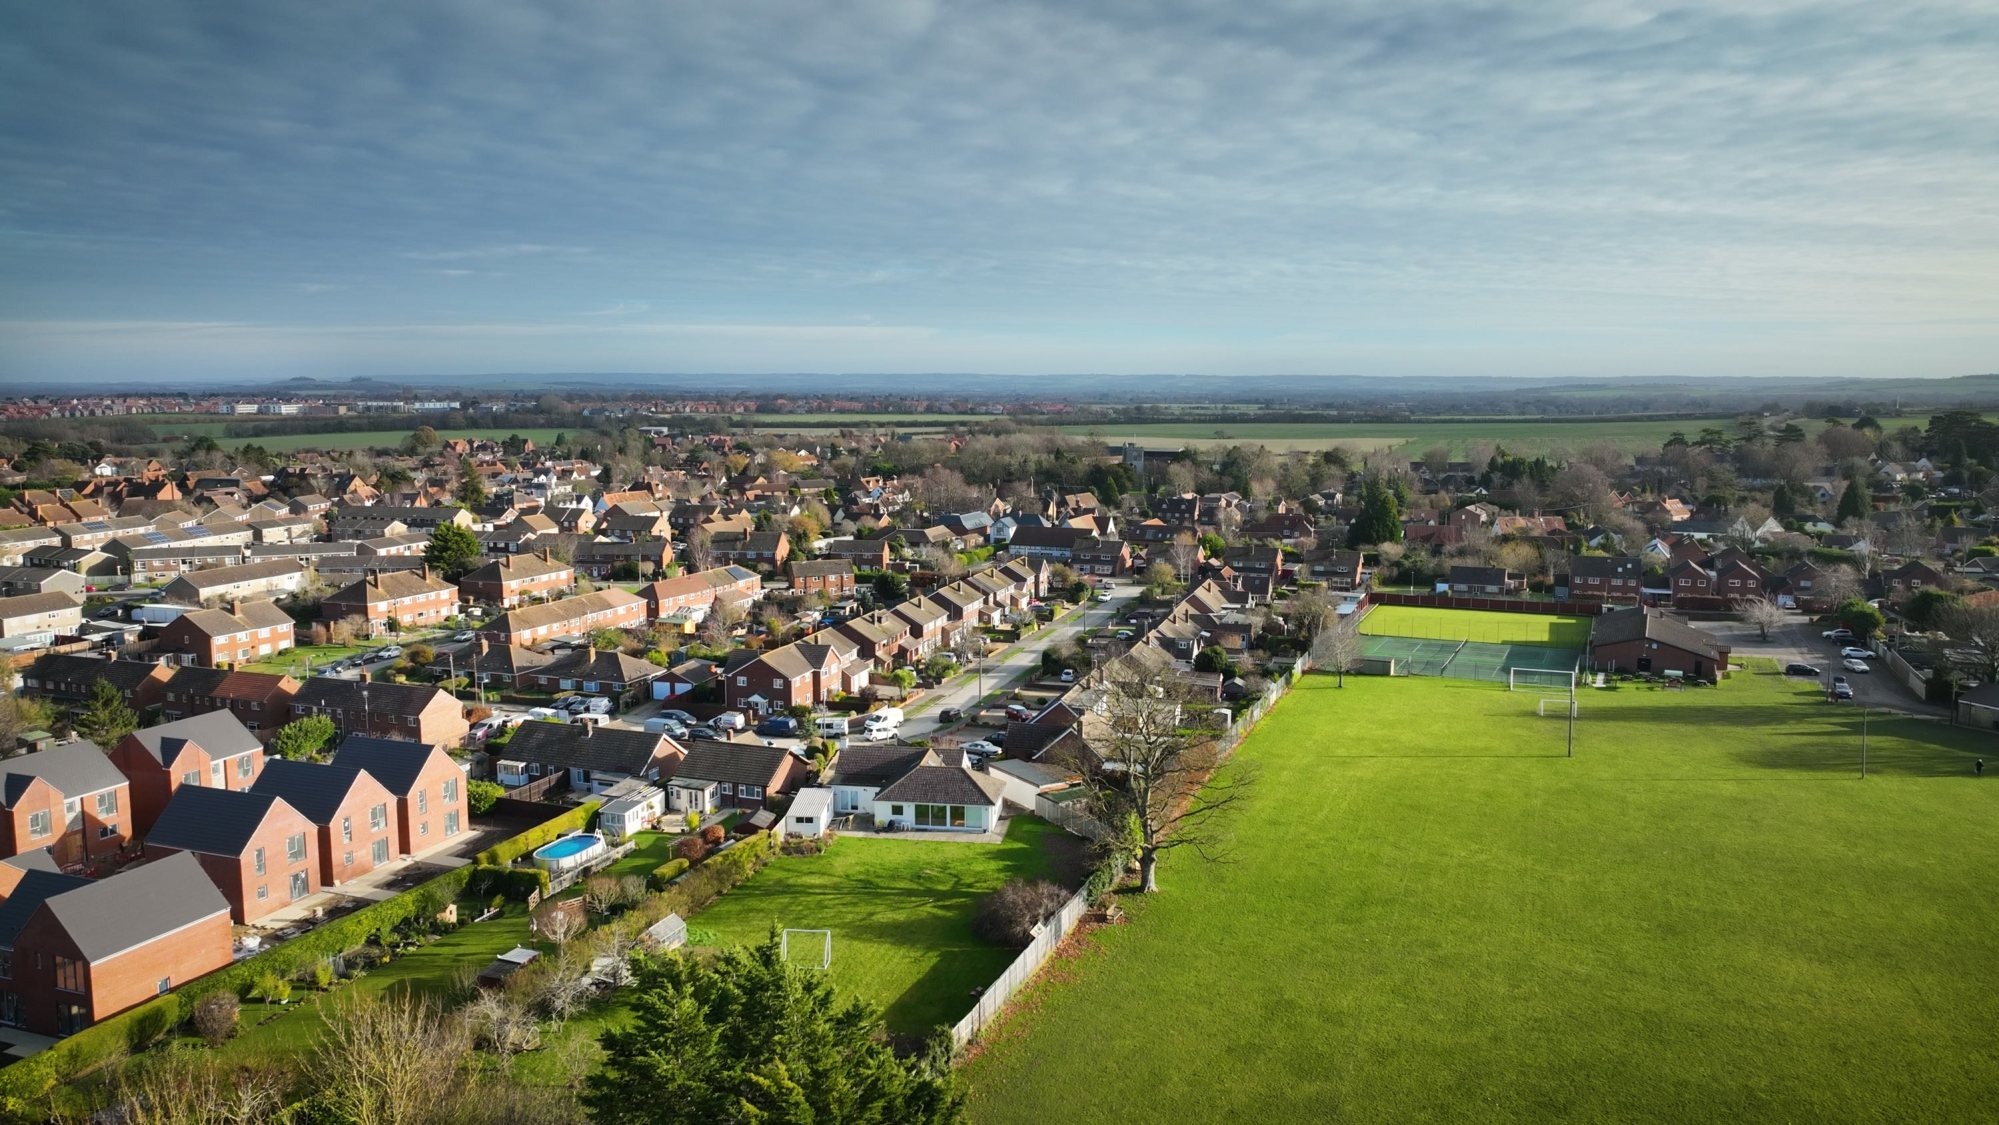 Drone photography - village view